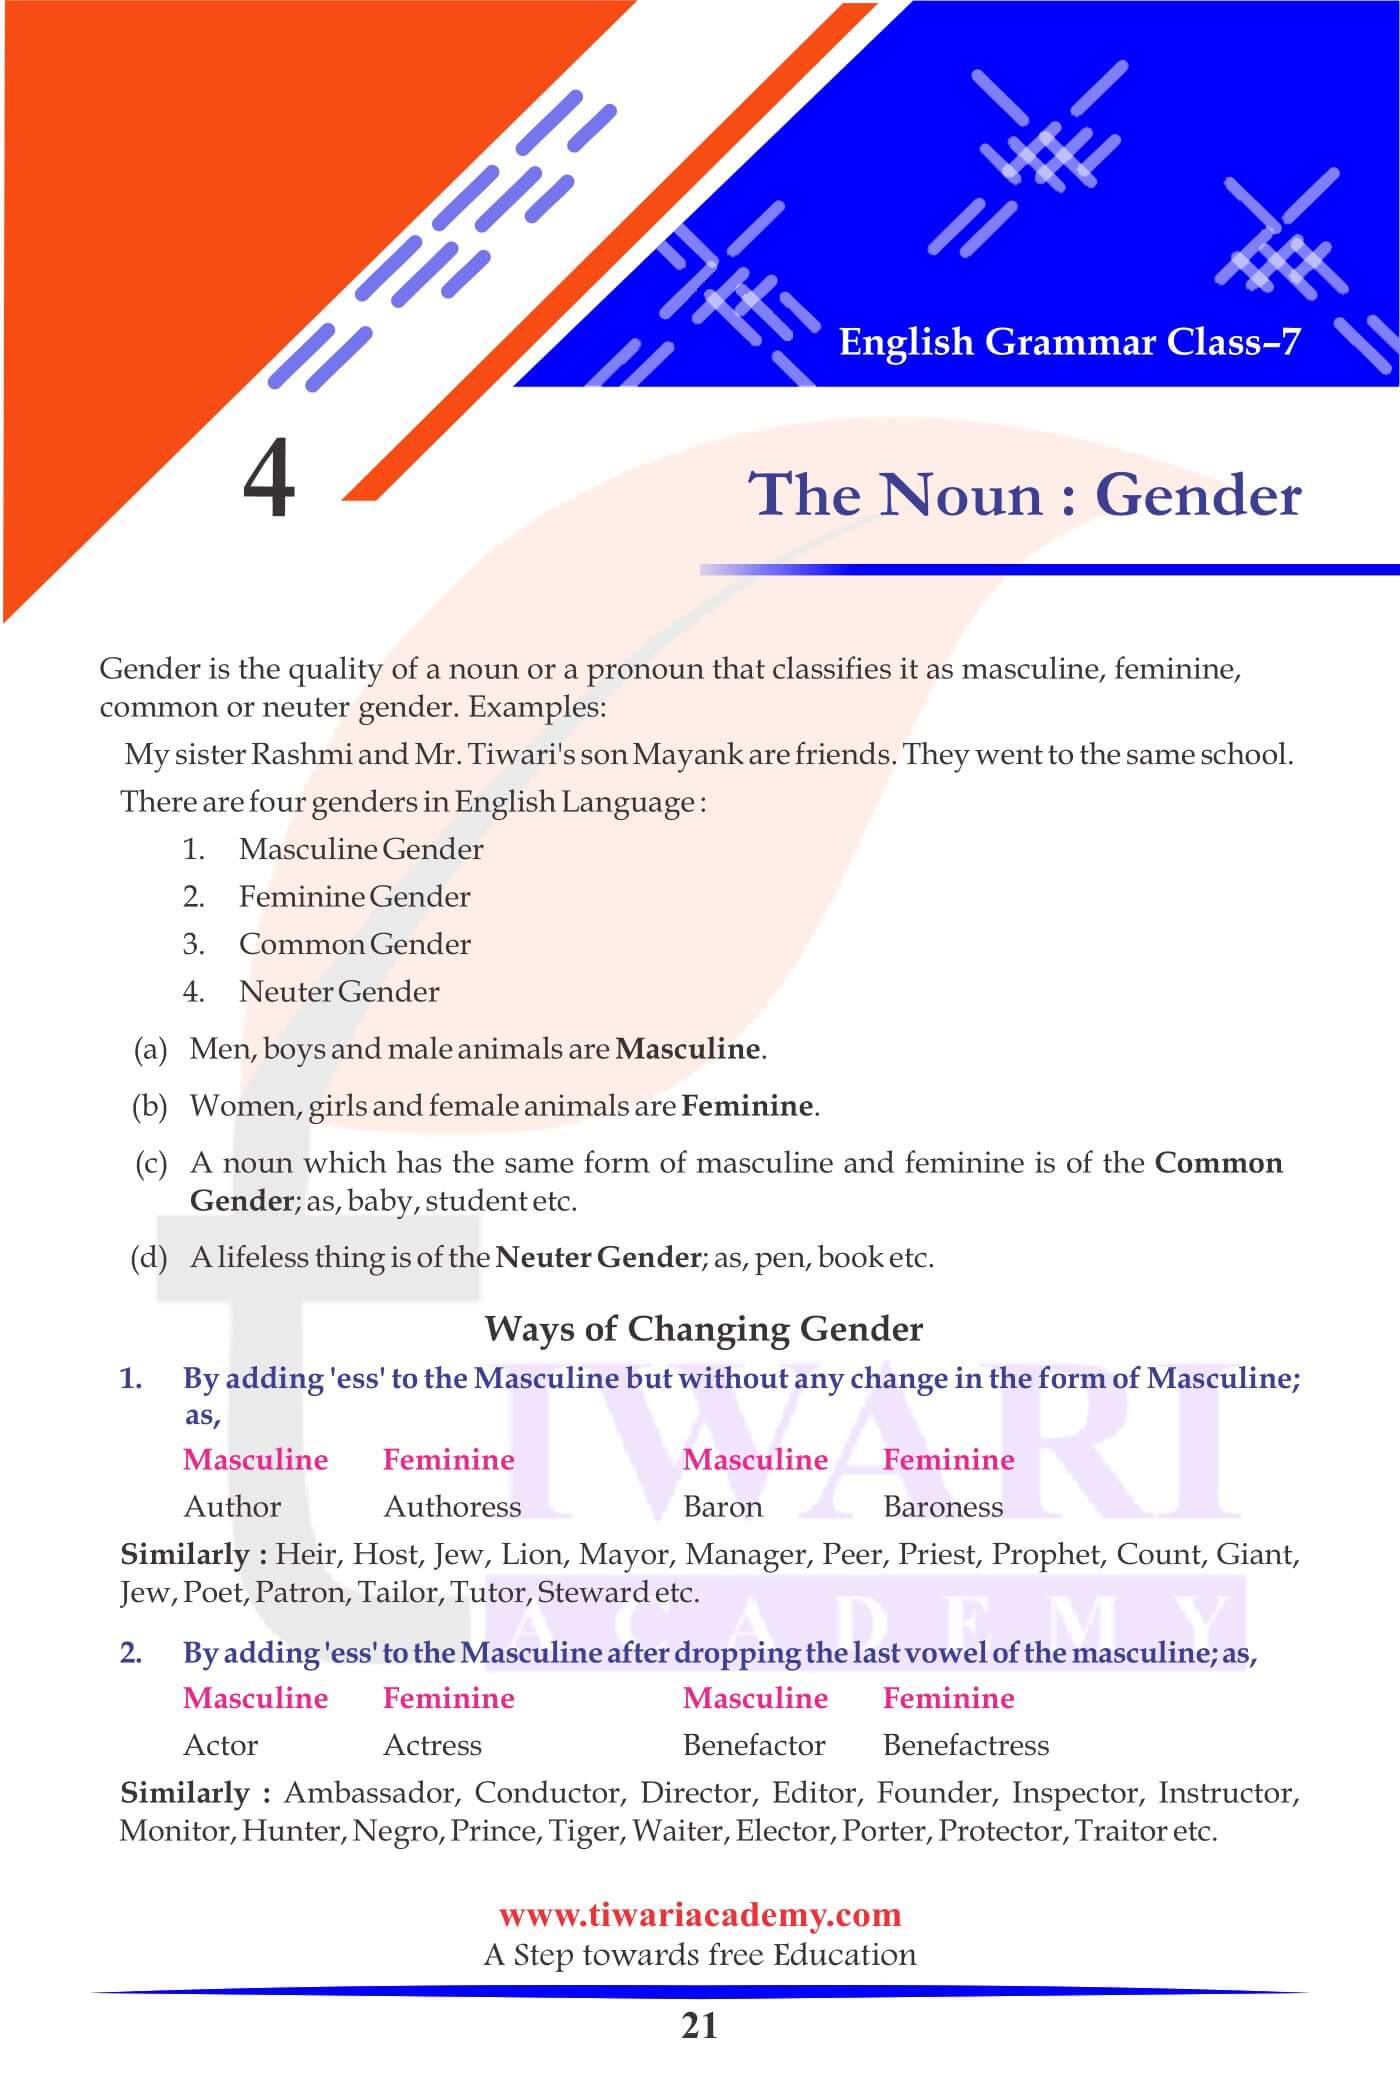 Class 7 English Grammar Chapter 4 for new session